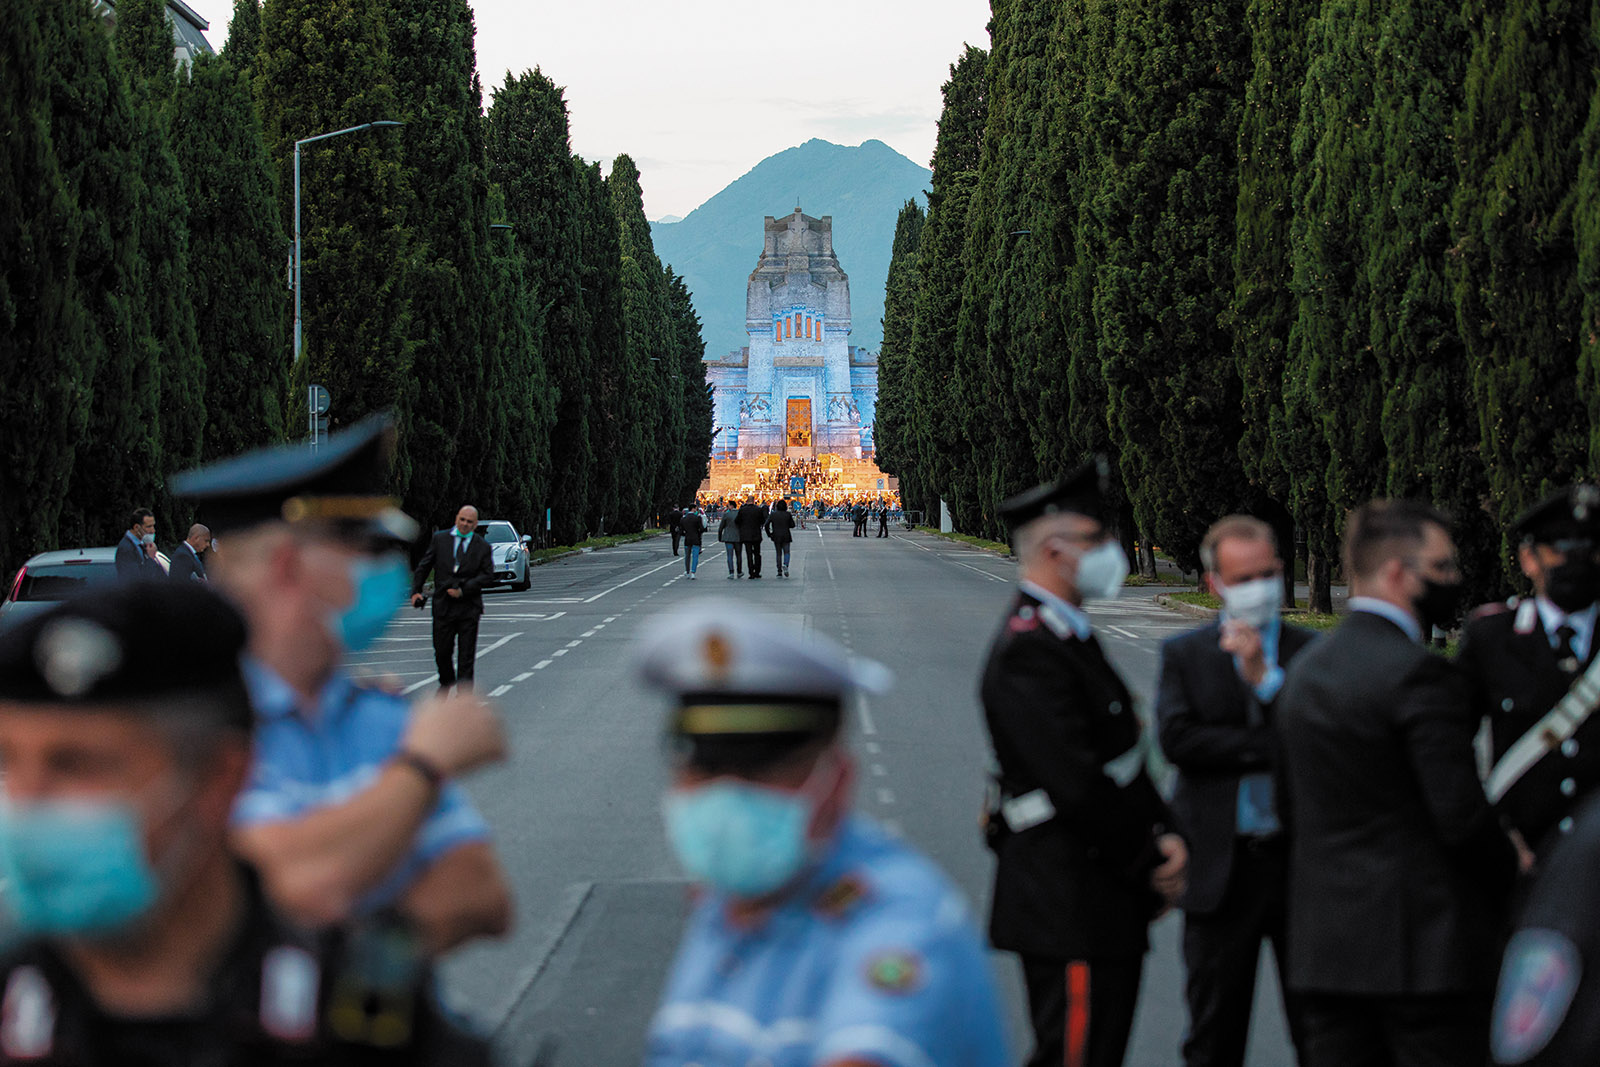 The Monumental Cemetery of Bergamo during a performance of Donizetti’s Requiem in memory of Covid-19 victims, Bergamo, Italy, June 2020